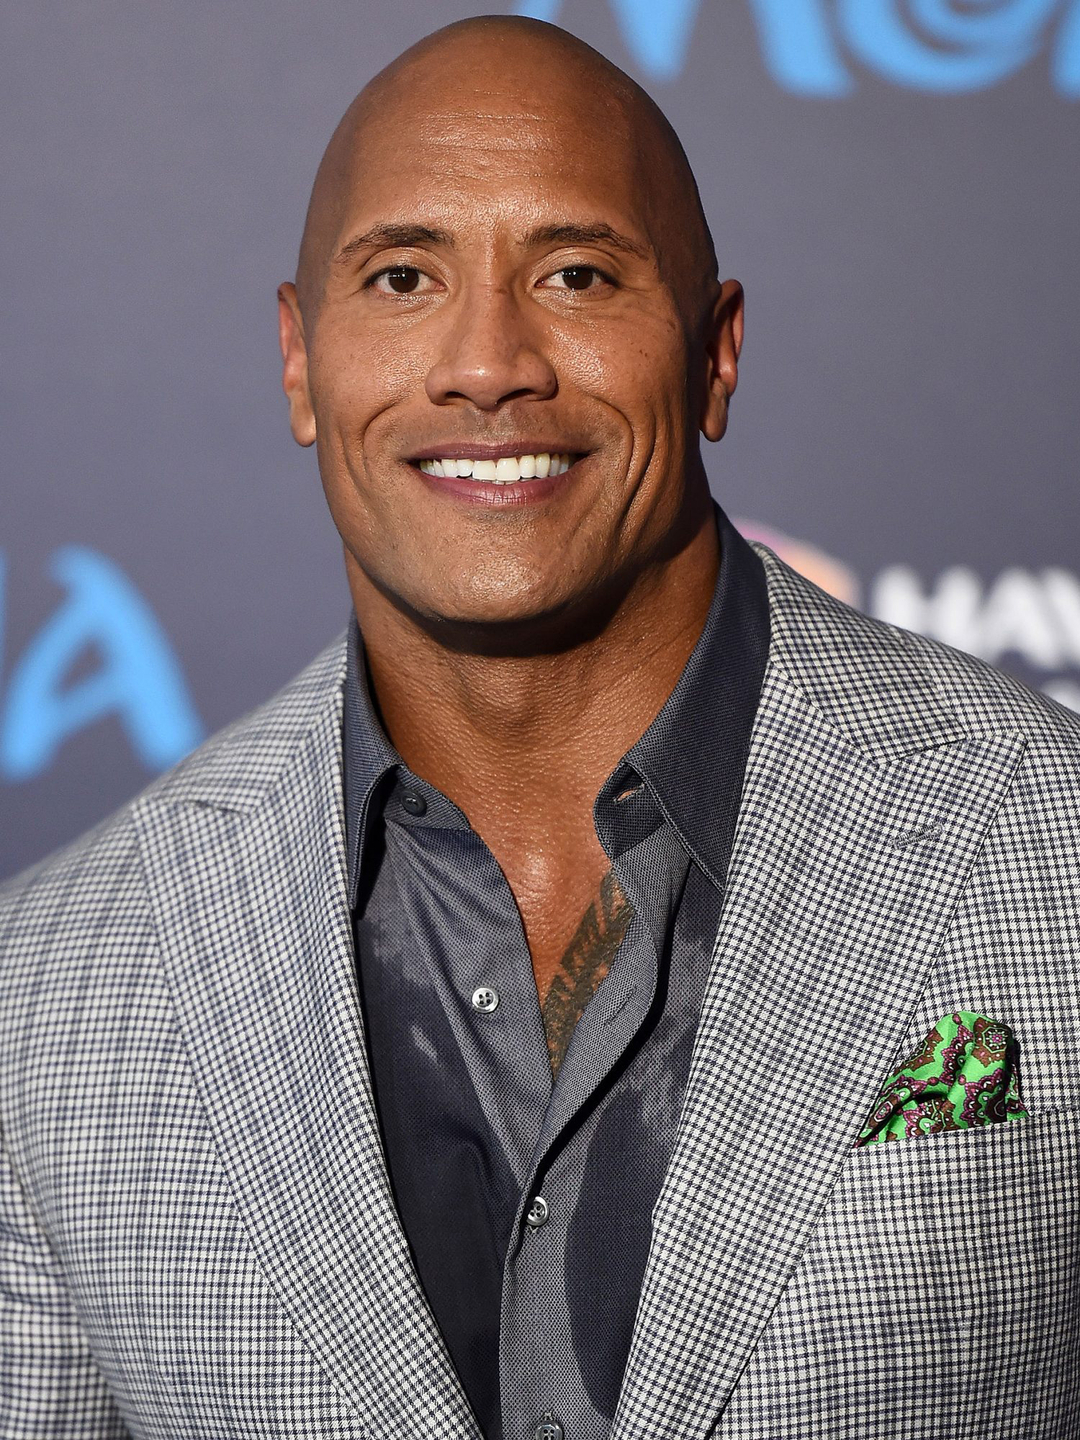 Dwayne Johnson in his youth